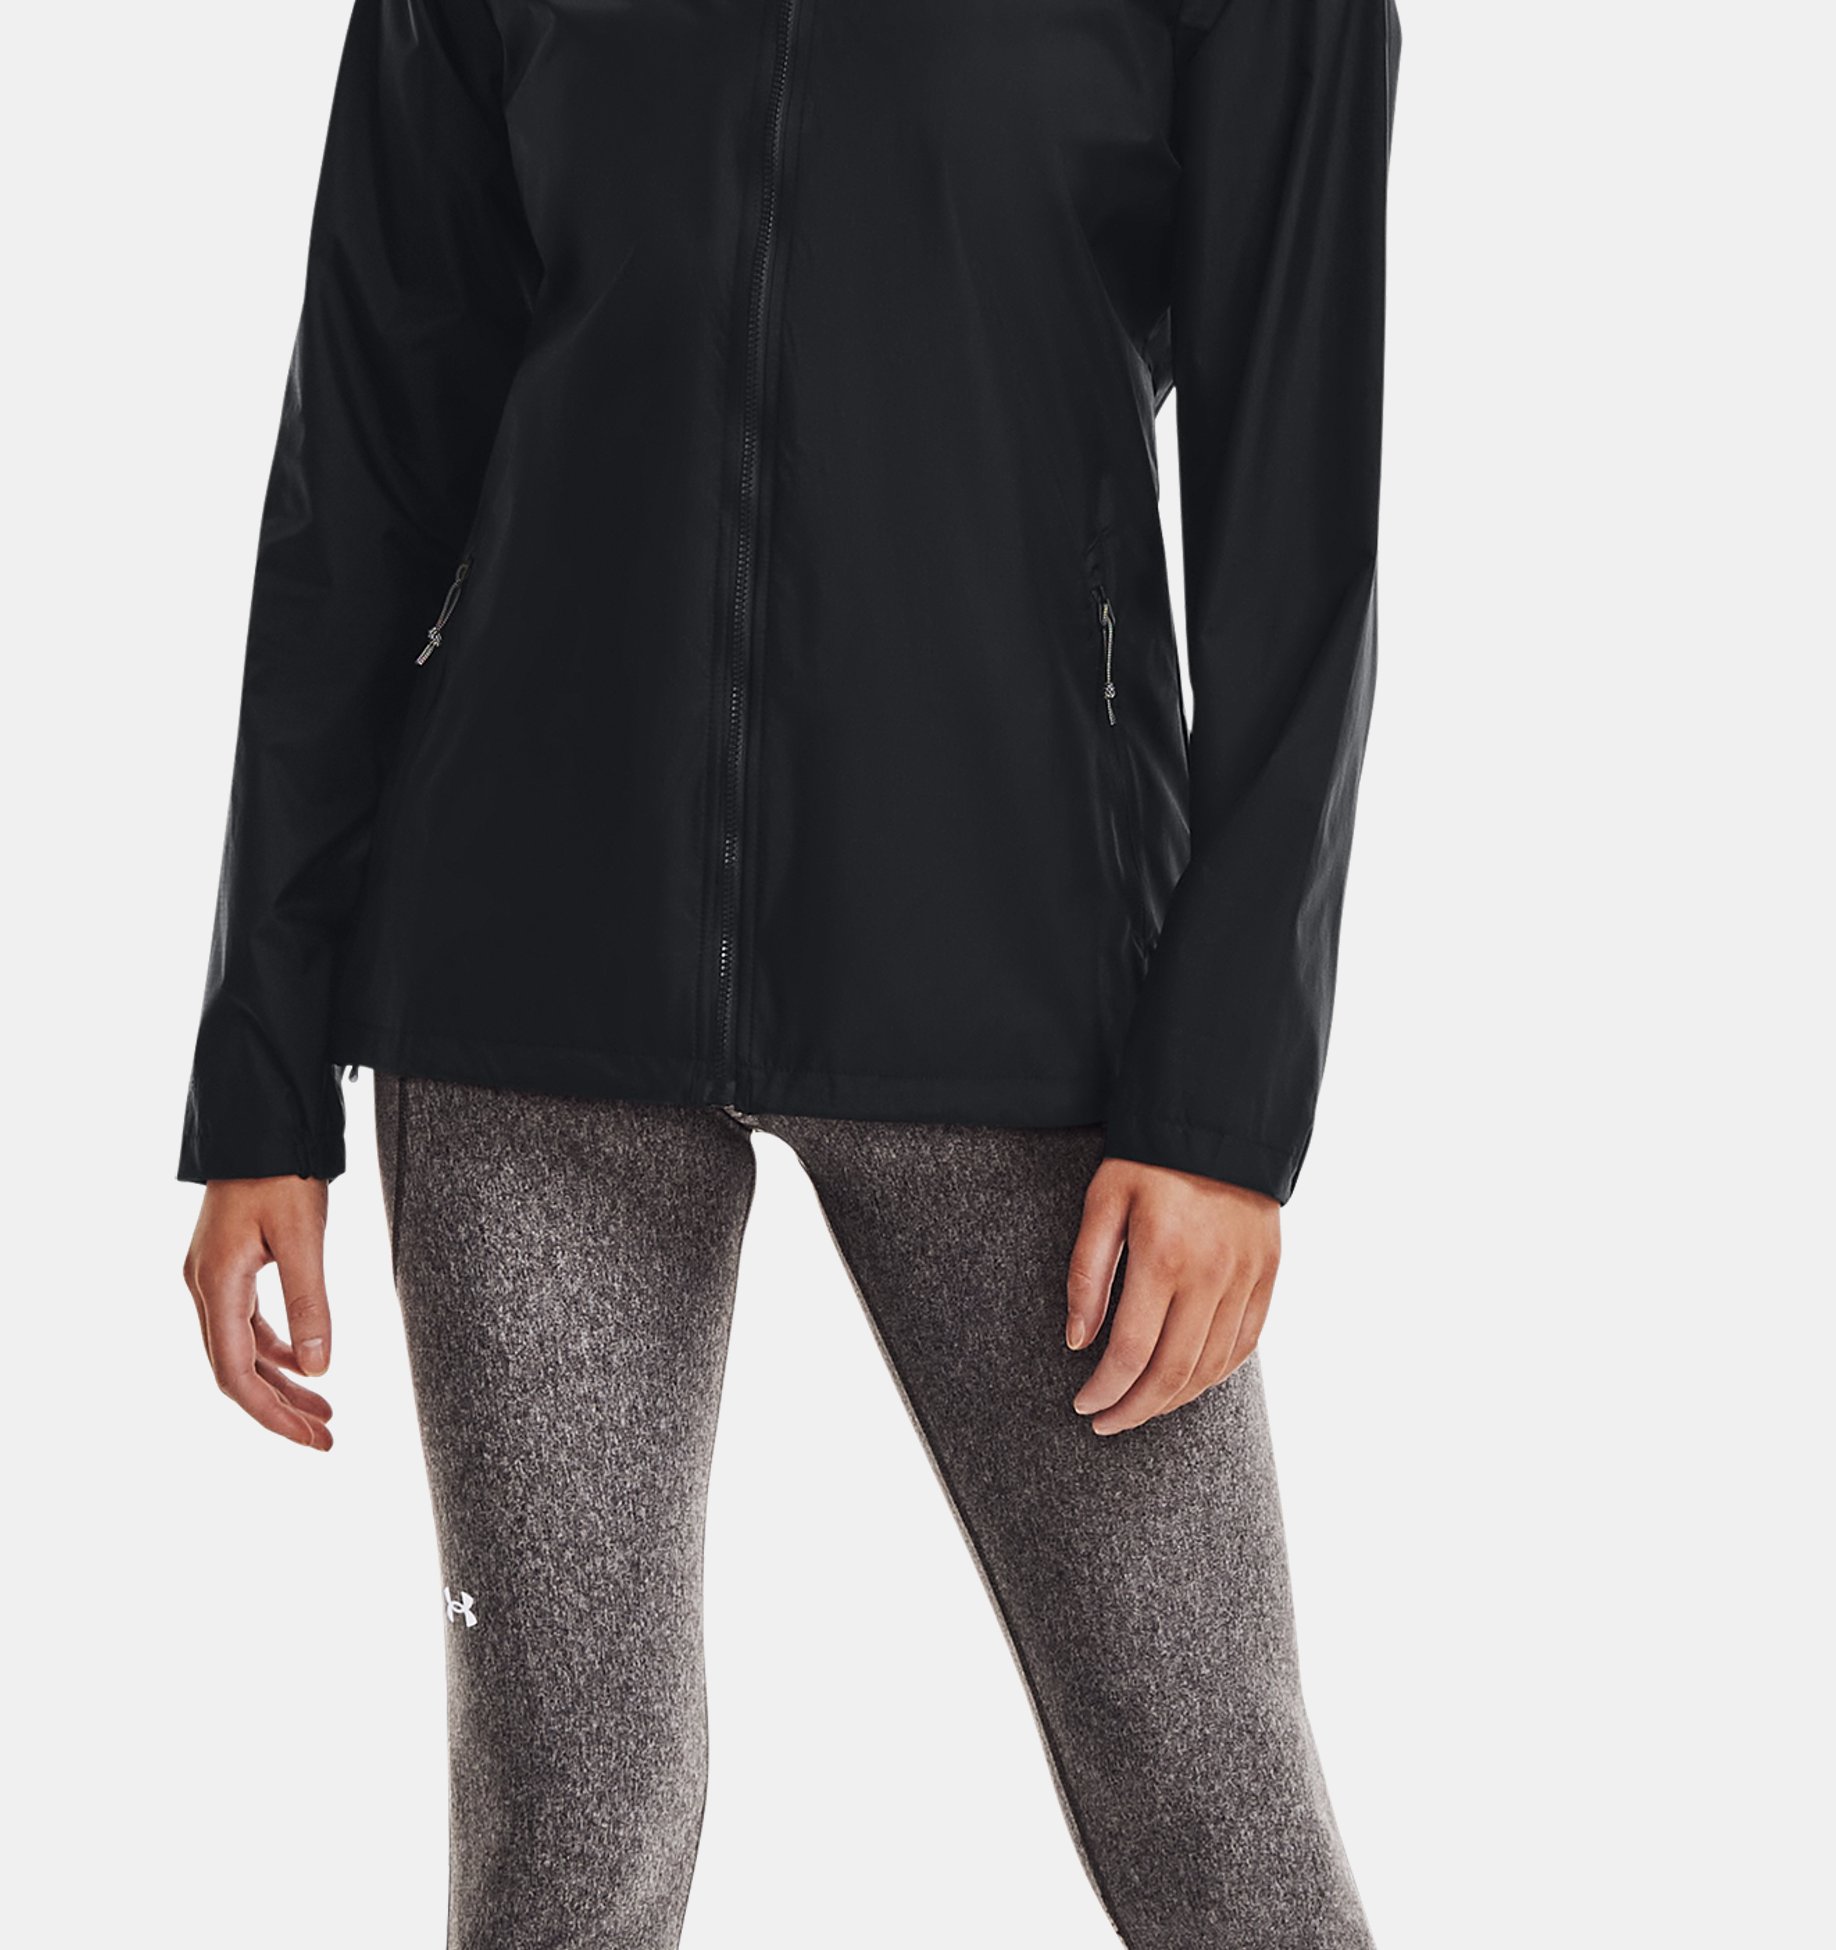 Chaqueta impermeable Storm Forefront para mujer | Under Armour